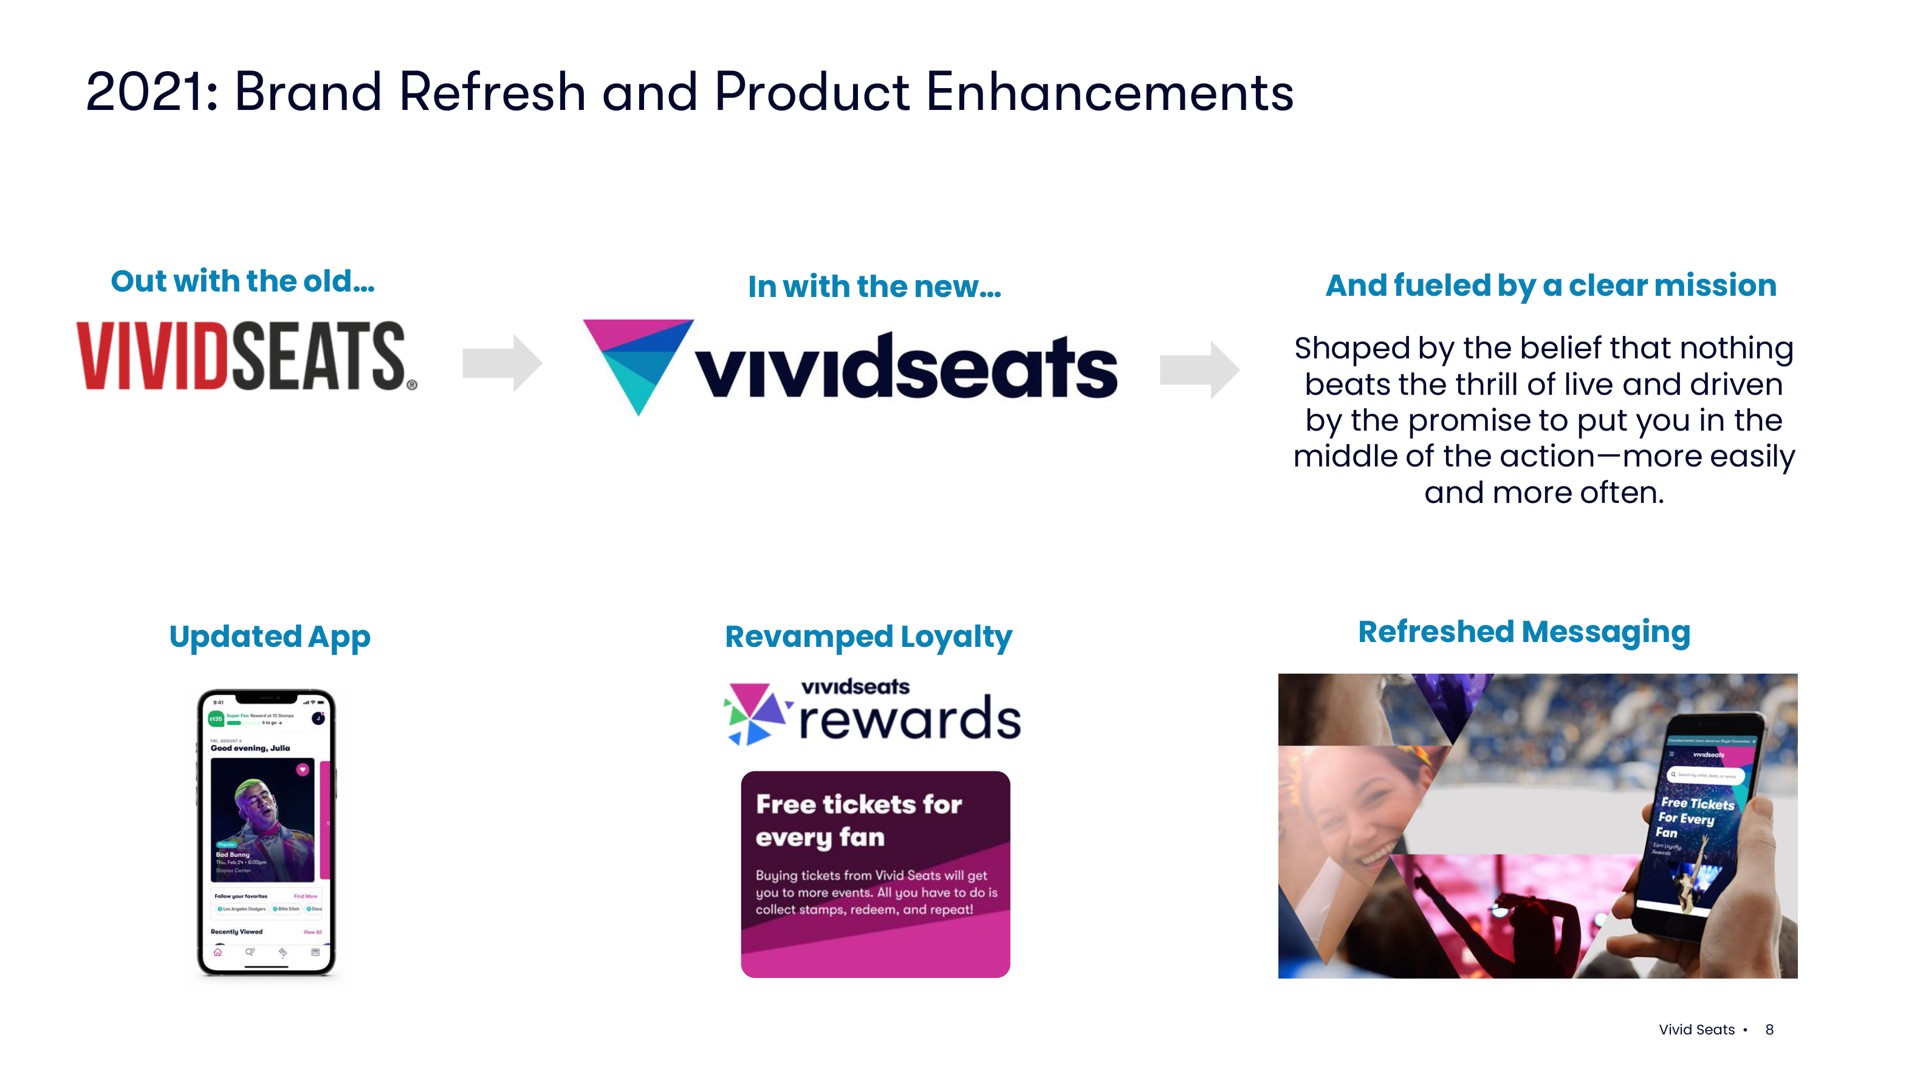 brand refresh and product enhancements shaped by the belief that nothing rewards | Vivid Seats